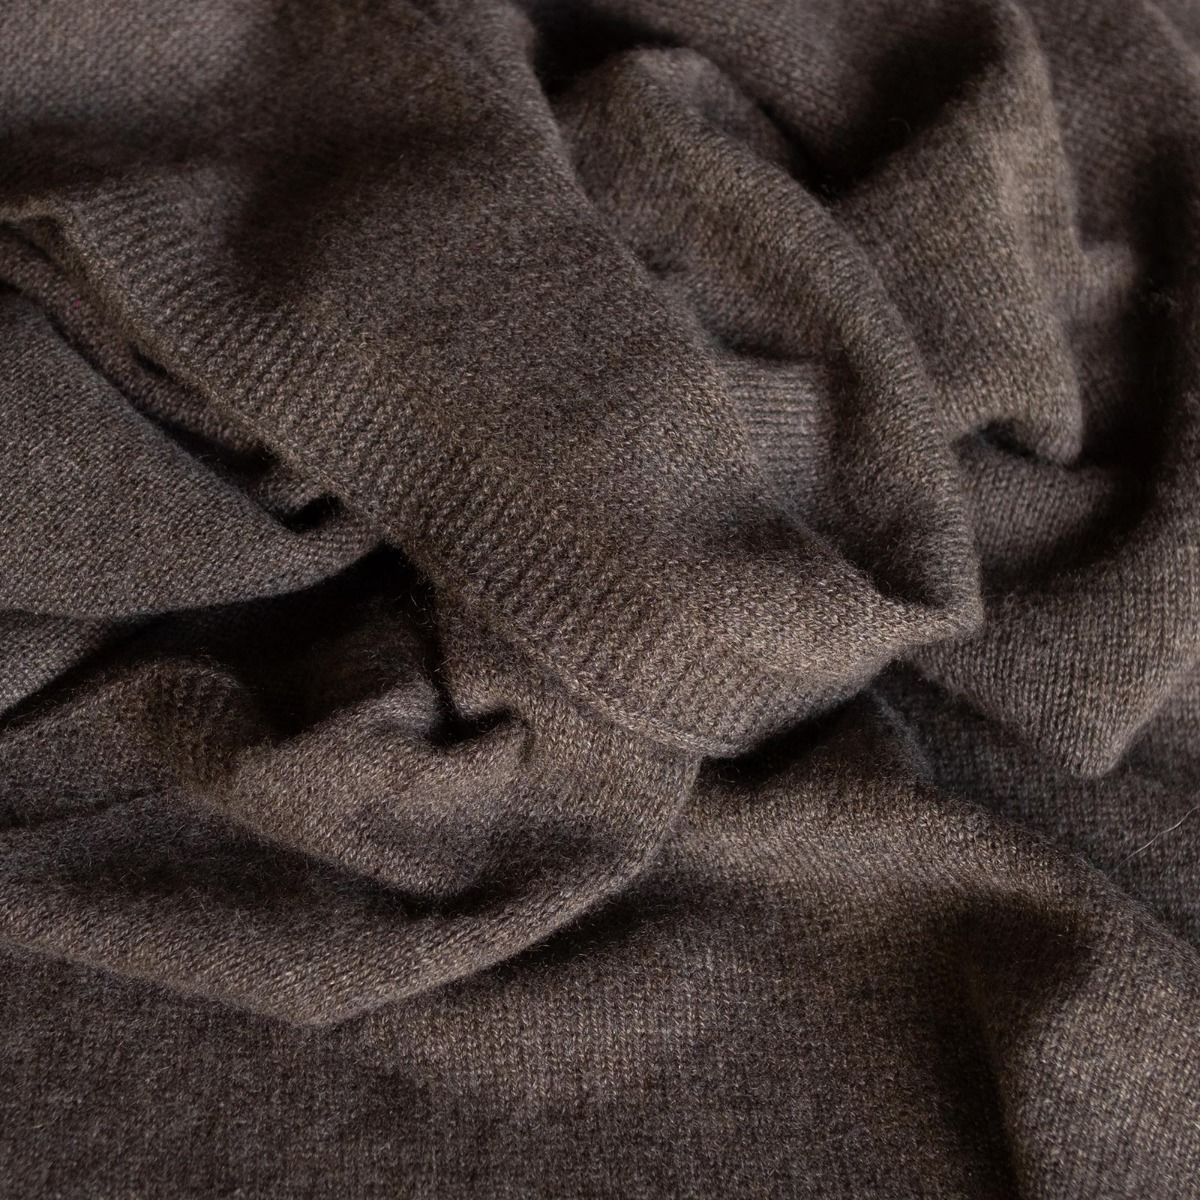 Mini Nut Brown cashmere Scarf | The Travelwrap Company